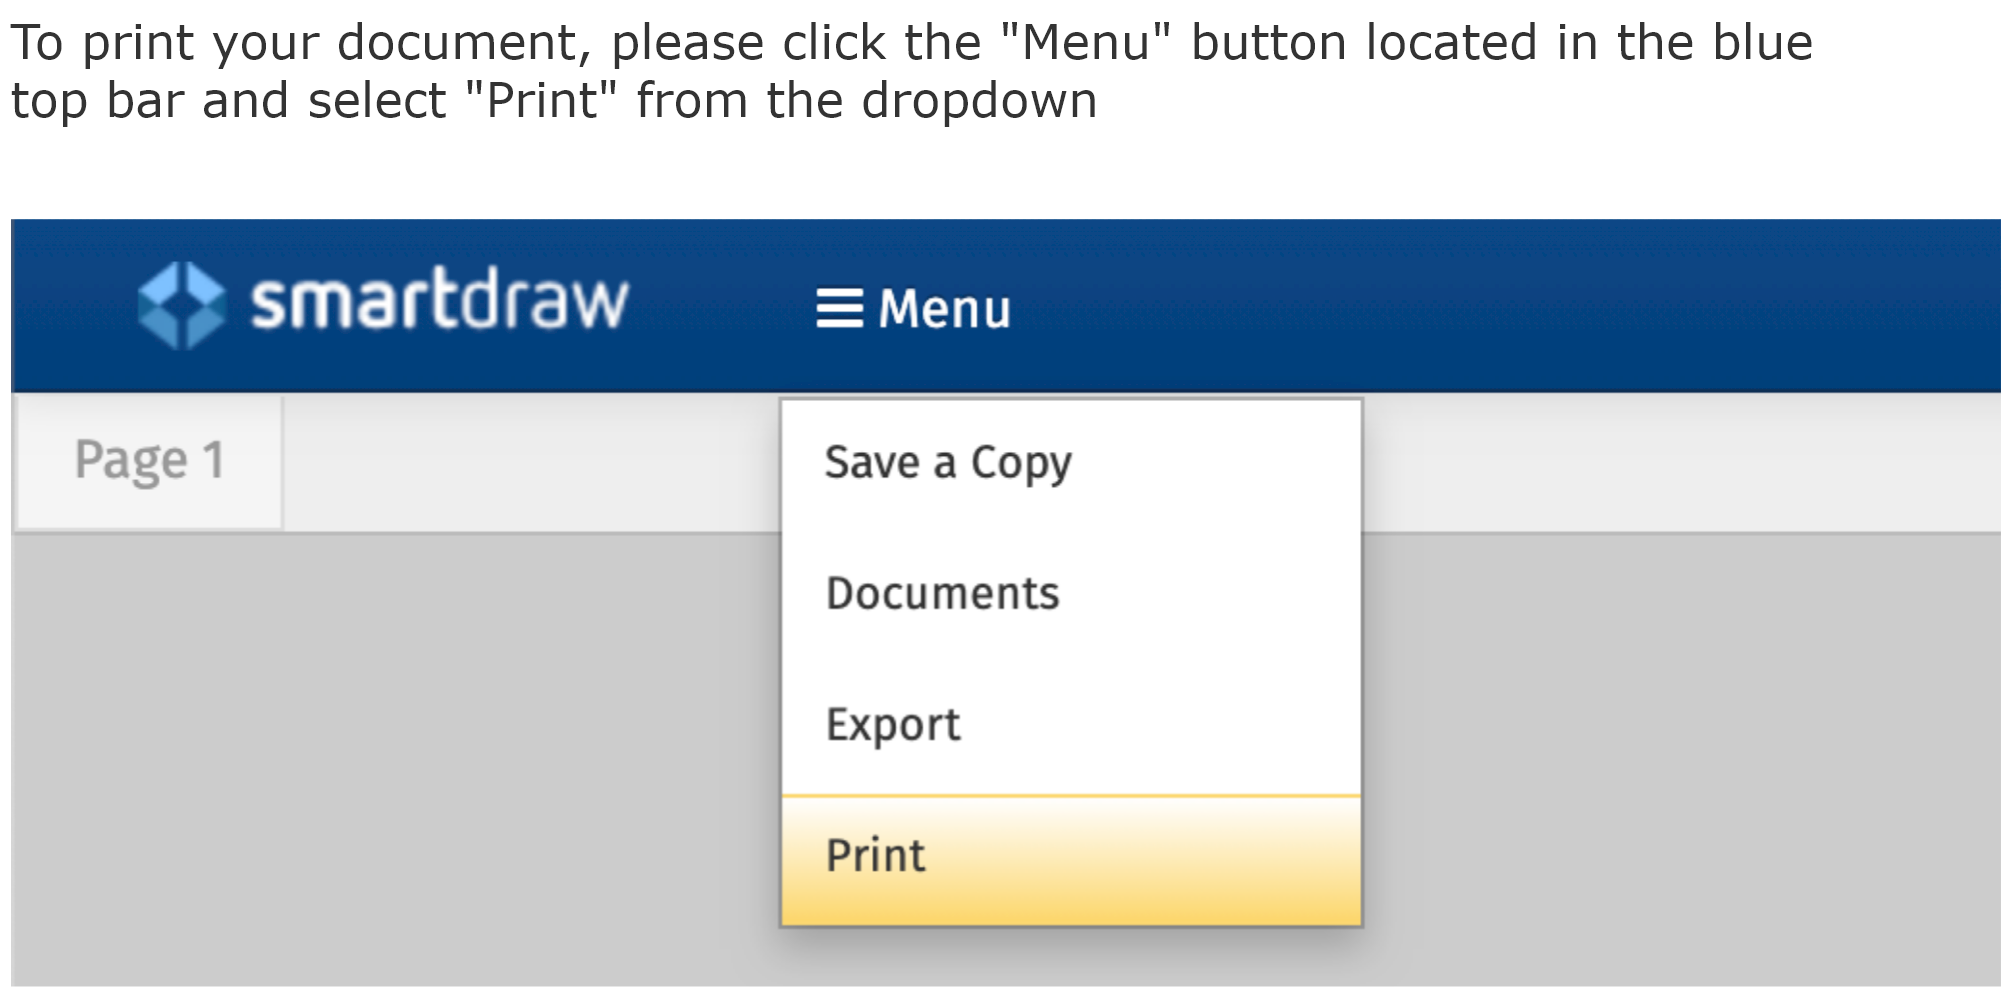 For best results use the print button found under File in the SmartDraw UI.